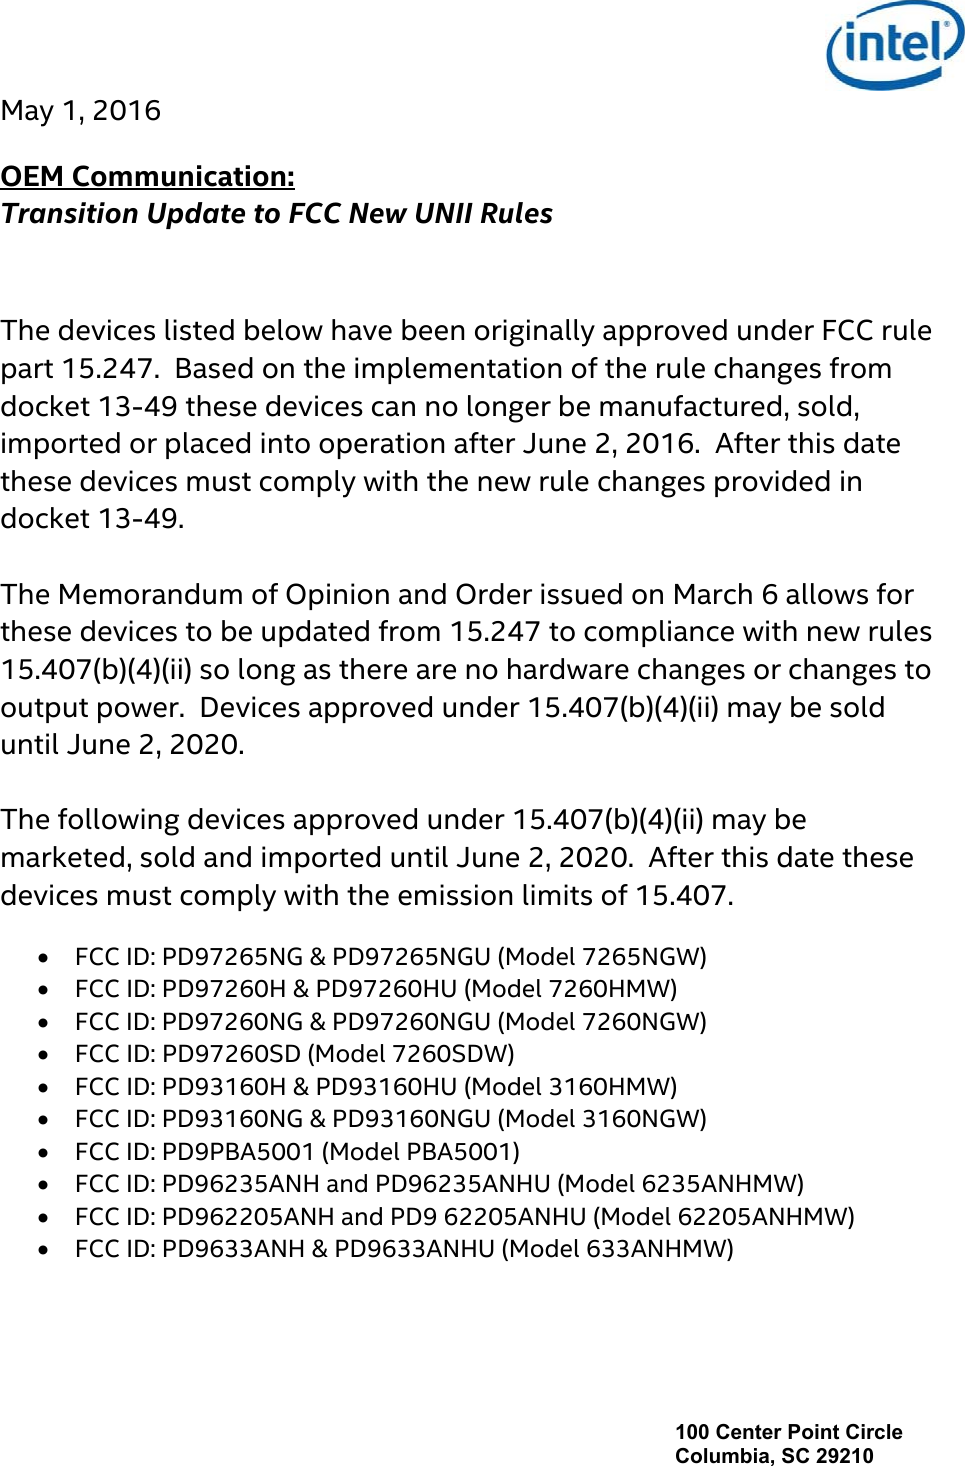 100 Center Point Circle Columbia, SC 29210 May 1, 2016 OEM Communication:   Transition Update to FCC New UNII Rules The devices listed below have been originally approved under FCC rule part 15.247.  Based on the implementation of the rule changes from docket 13-49 these devices can no longer be manufactured, sold, imported or placed into operation after June 2, 2016.  After this date these devices must comply with the new rule changes provided in docket 13-49. The Memorandum of Opinion and Order issued on March 6 allows for these devices to be updated from 15.247 to compliance with new rules 15.407(b)(4)(ii) so long as there are no hardware changes or changes to output power.  Devices approved under 15.407(b)(4)(ii) may be sold until June 2, 2020. The following devices approved under 15.407(b)(4)(ii) may be marketed, sold and imported until June 2, 2020.  After this date these devices must comply with the emission limits of 15.407. •FCC ID: PD97265NG &amp; PD97265NGU (Model 7265NGW)•FCC ID: PD97260H &amp; PD97260HU (Model 7260HMW)•FCC ID: PD97260NG &amp; PD97260NGU (Model 7260NGW)•FCC ID: PD97260SD (Model 7260SDW)•FCC ID: PD93160H &amp; PD93160HU (Model 3160HMW)•FCC ID: PD93160NG &amp; PD93160NGU (Model 3160NGW)•FCC ID: PD9PBA5001 (Model PBA5001)•FCC ID: PD96235ANH and PD96235ANHU (Model 6235ANHMW)•FCC ID: PD962205ANH and PD9 62205ANHU (Model 62205ANHMW)•FCC ID: PD9633ANH &amp; PD9633ANHU (Model 633ANHMW) 